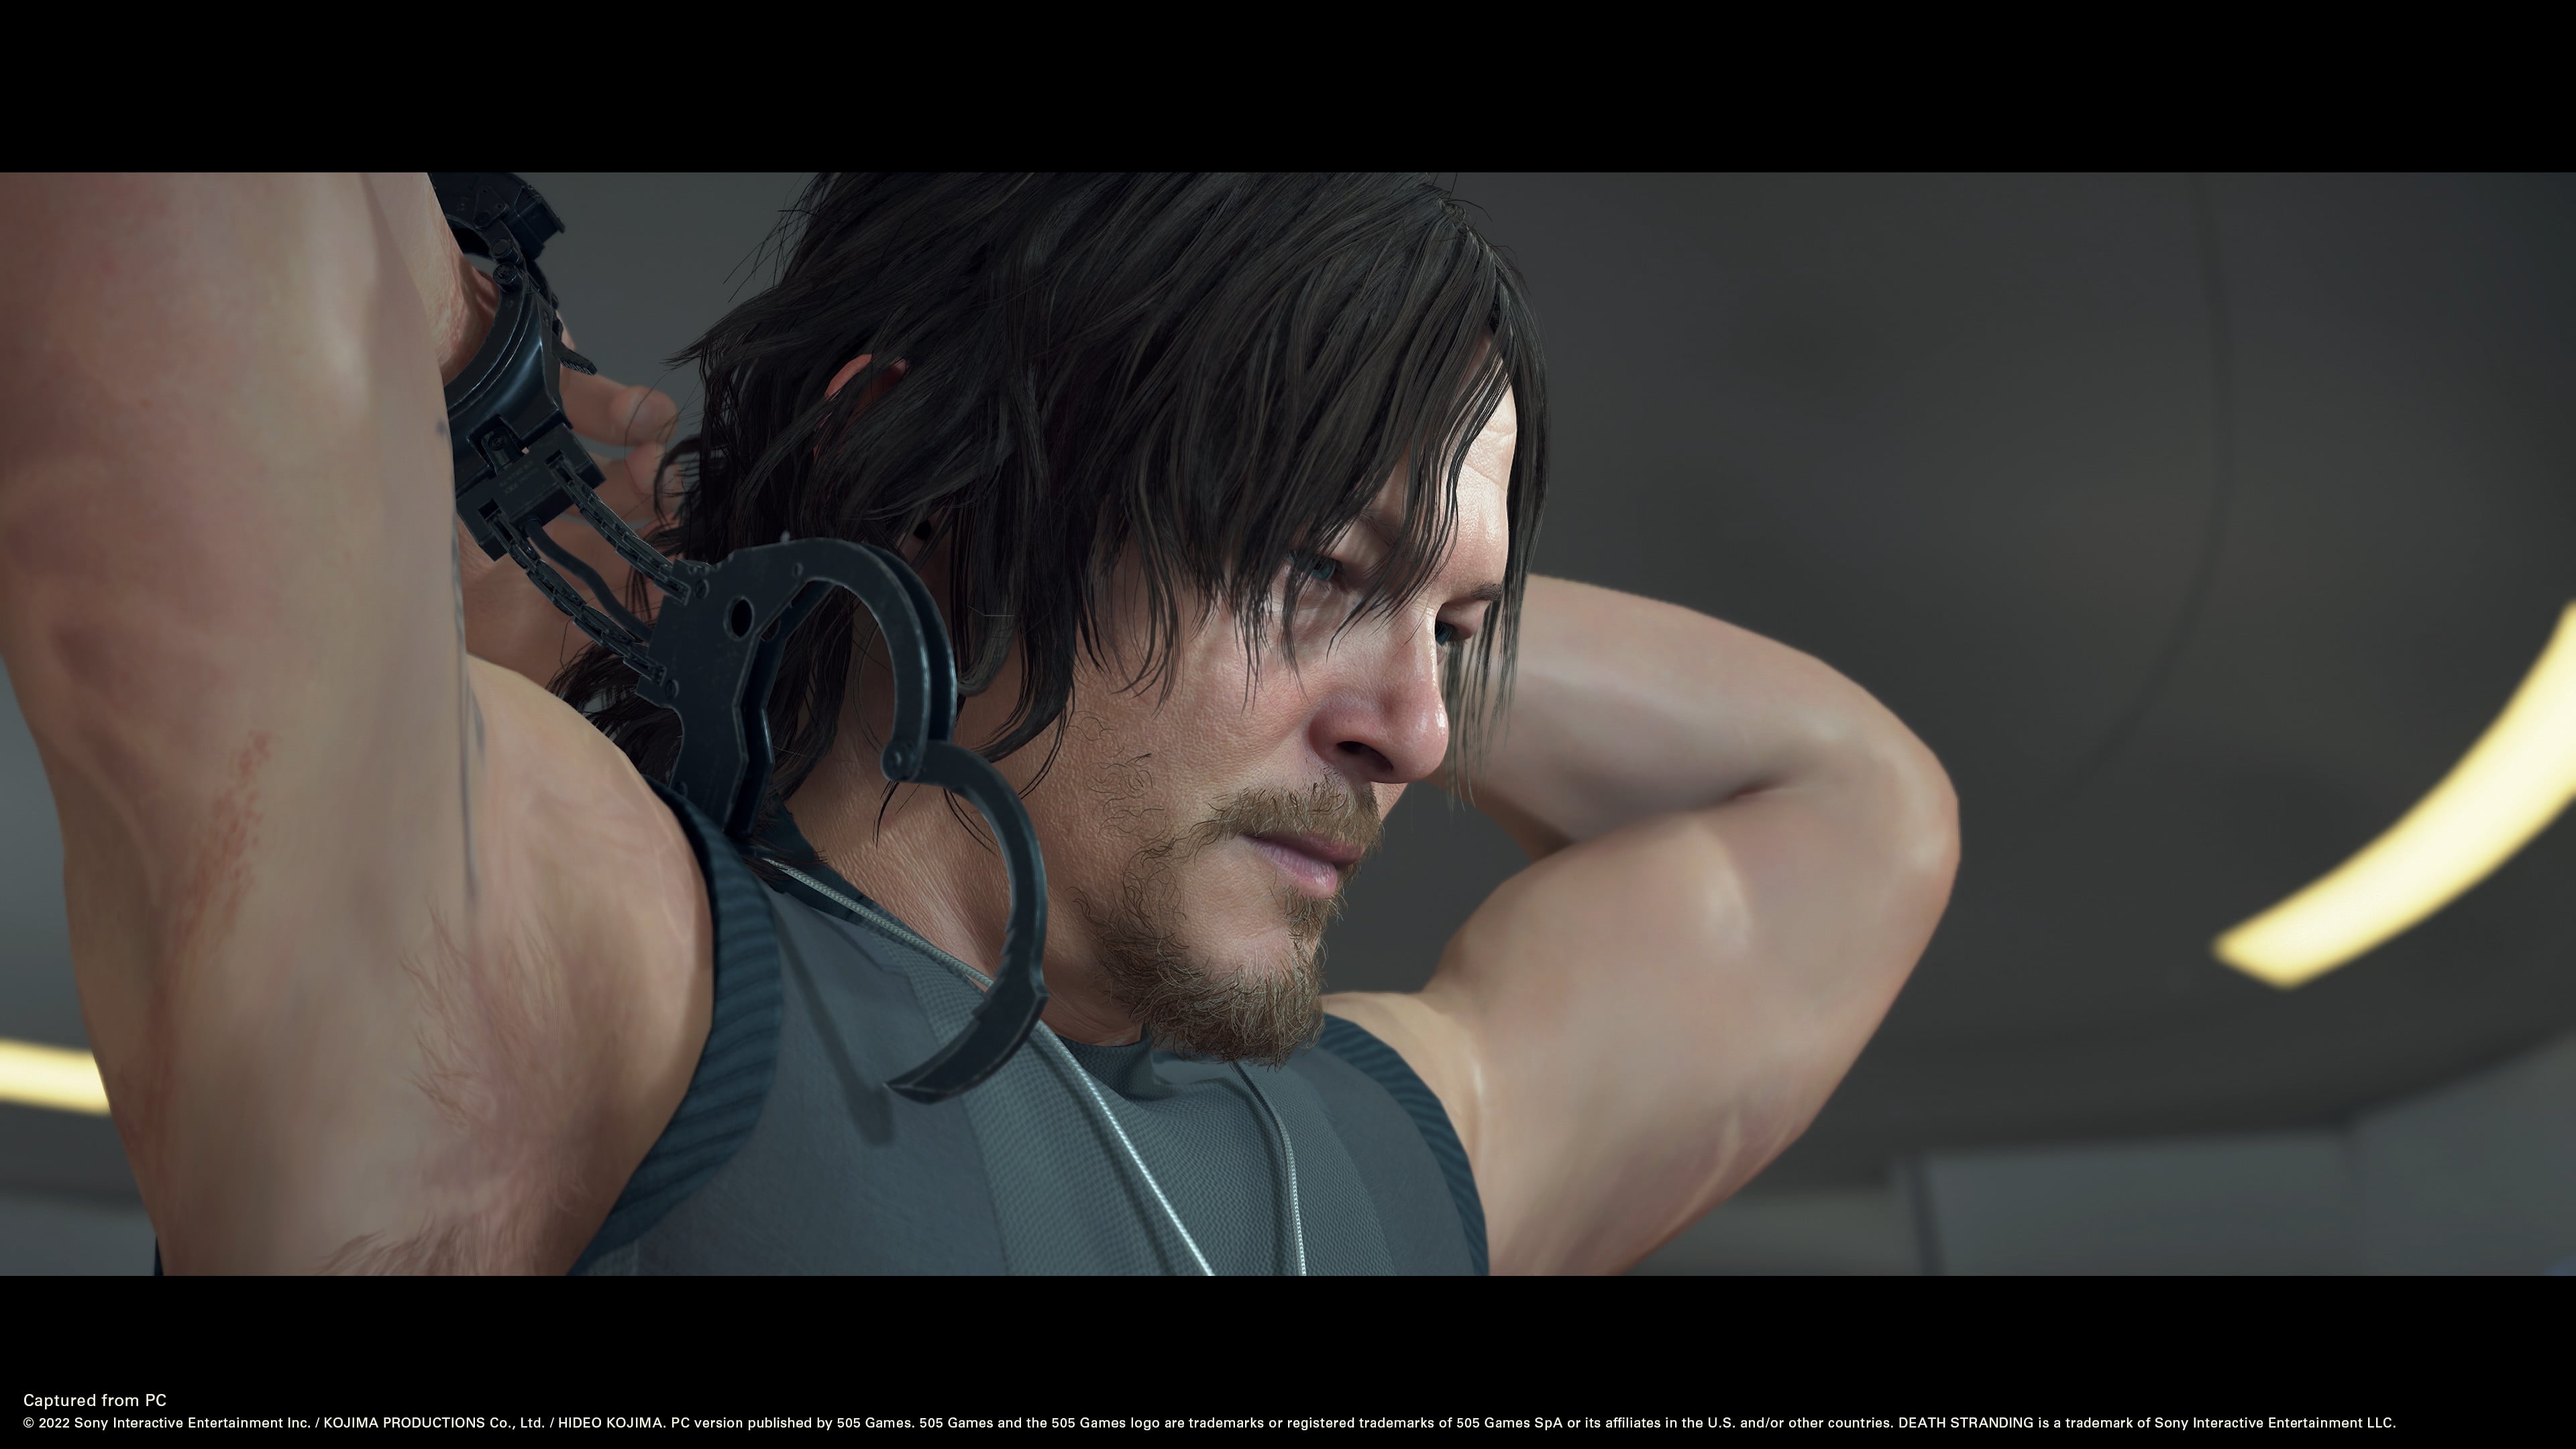 Death Stranding: Director's Cut Steam Key for PC - Buy now